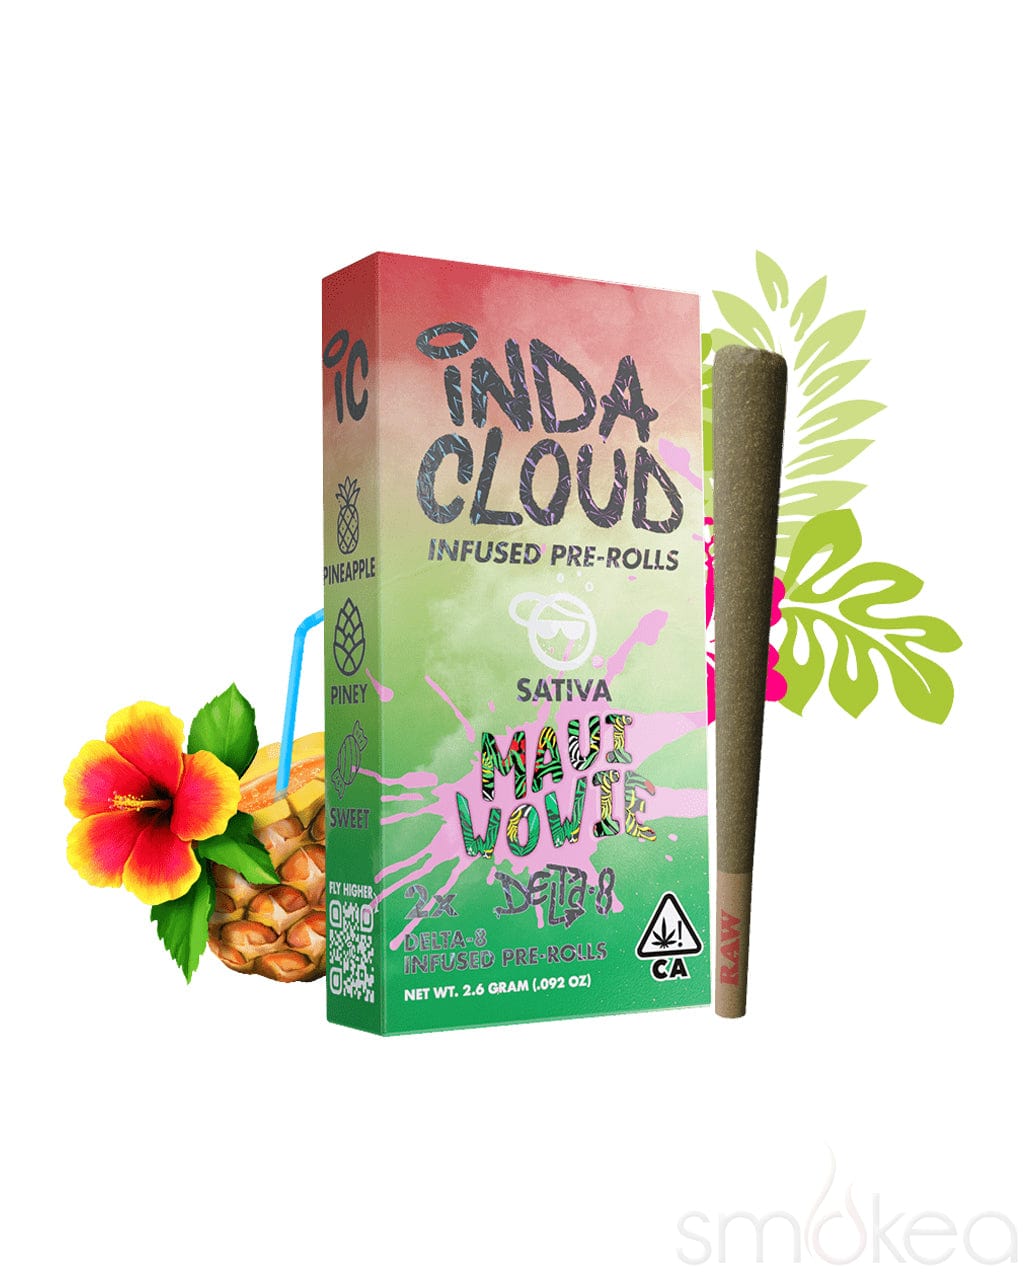 Indacloud King Size Delta 8 Pre-Rolls - Maui Wowie (2-Pack)